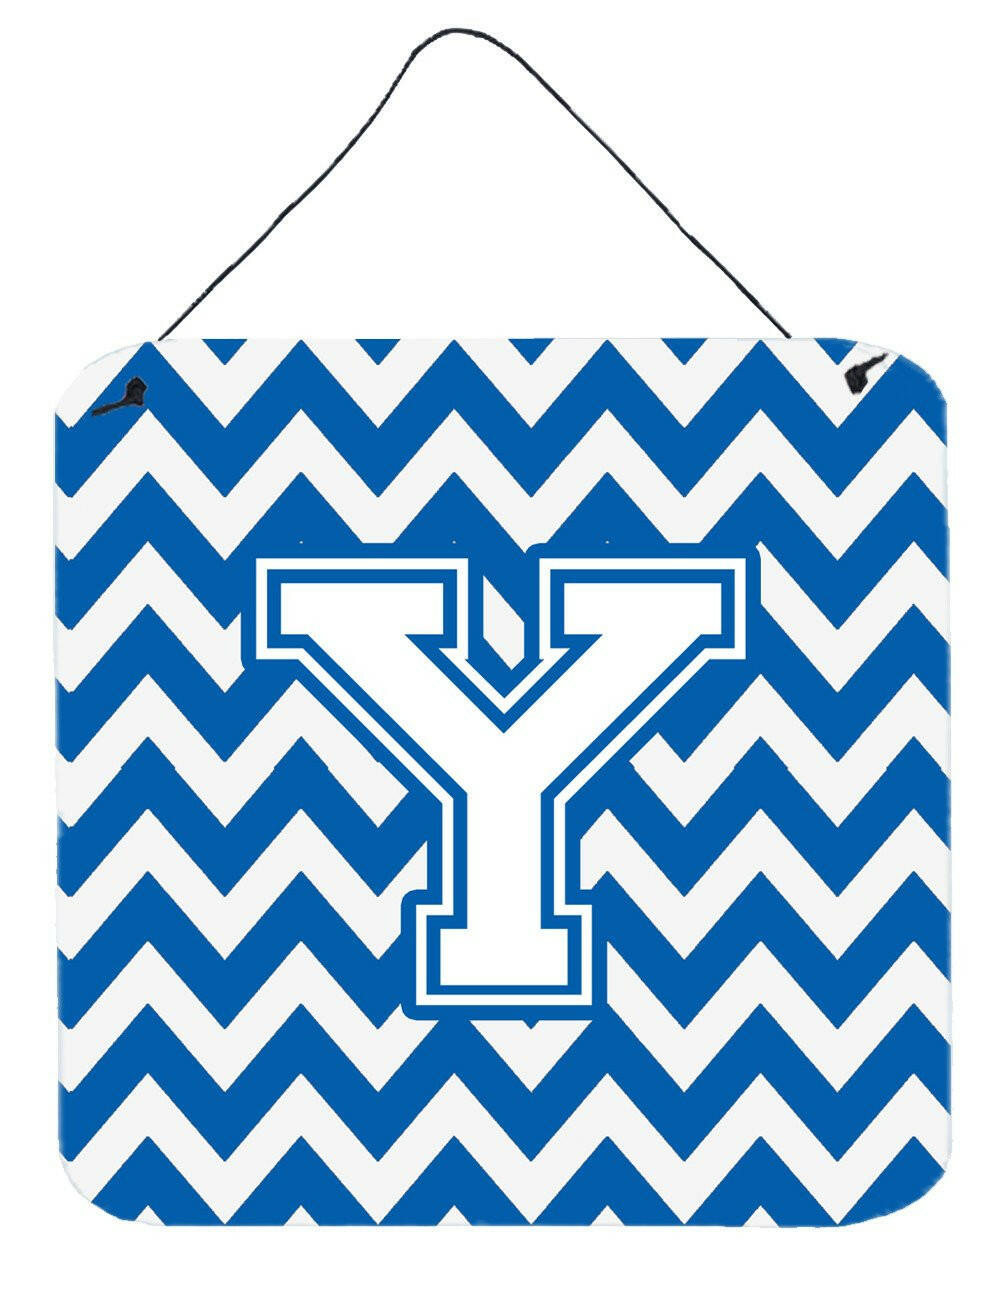 Letter Y Chevron Blue and White Wall or Door Hanging Prints CJ1045-YDS66 by Caroline's Treasures